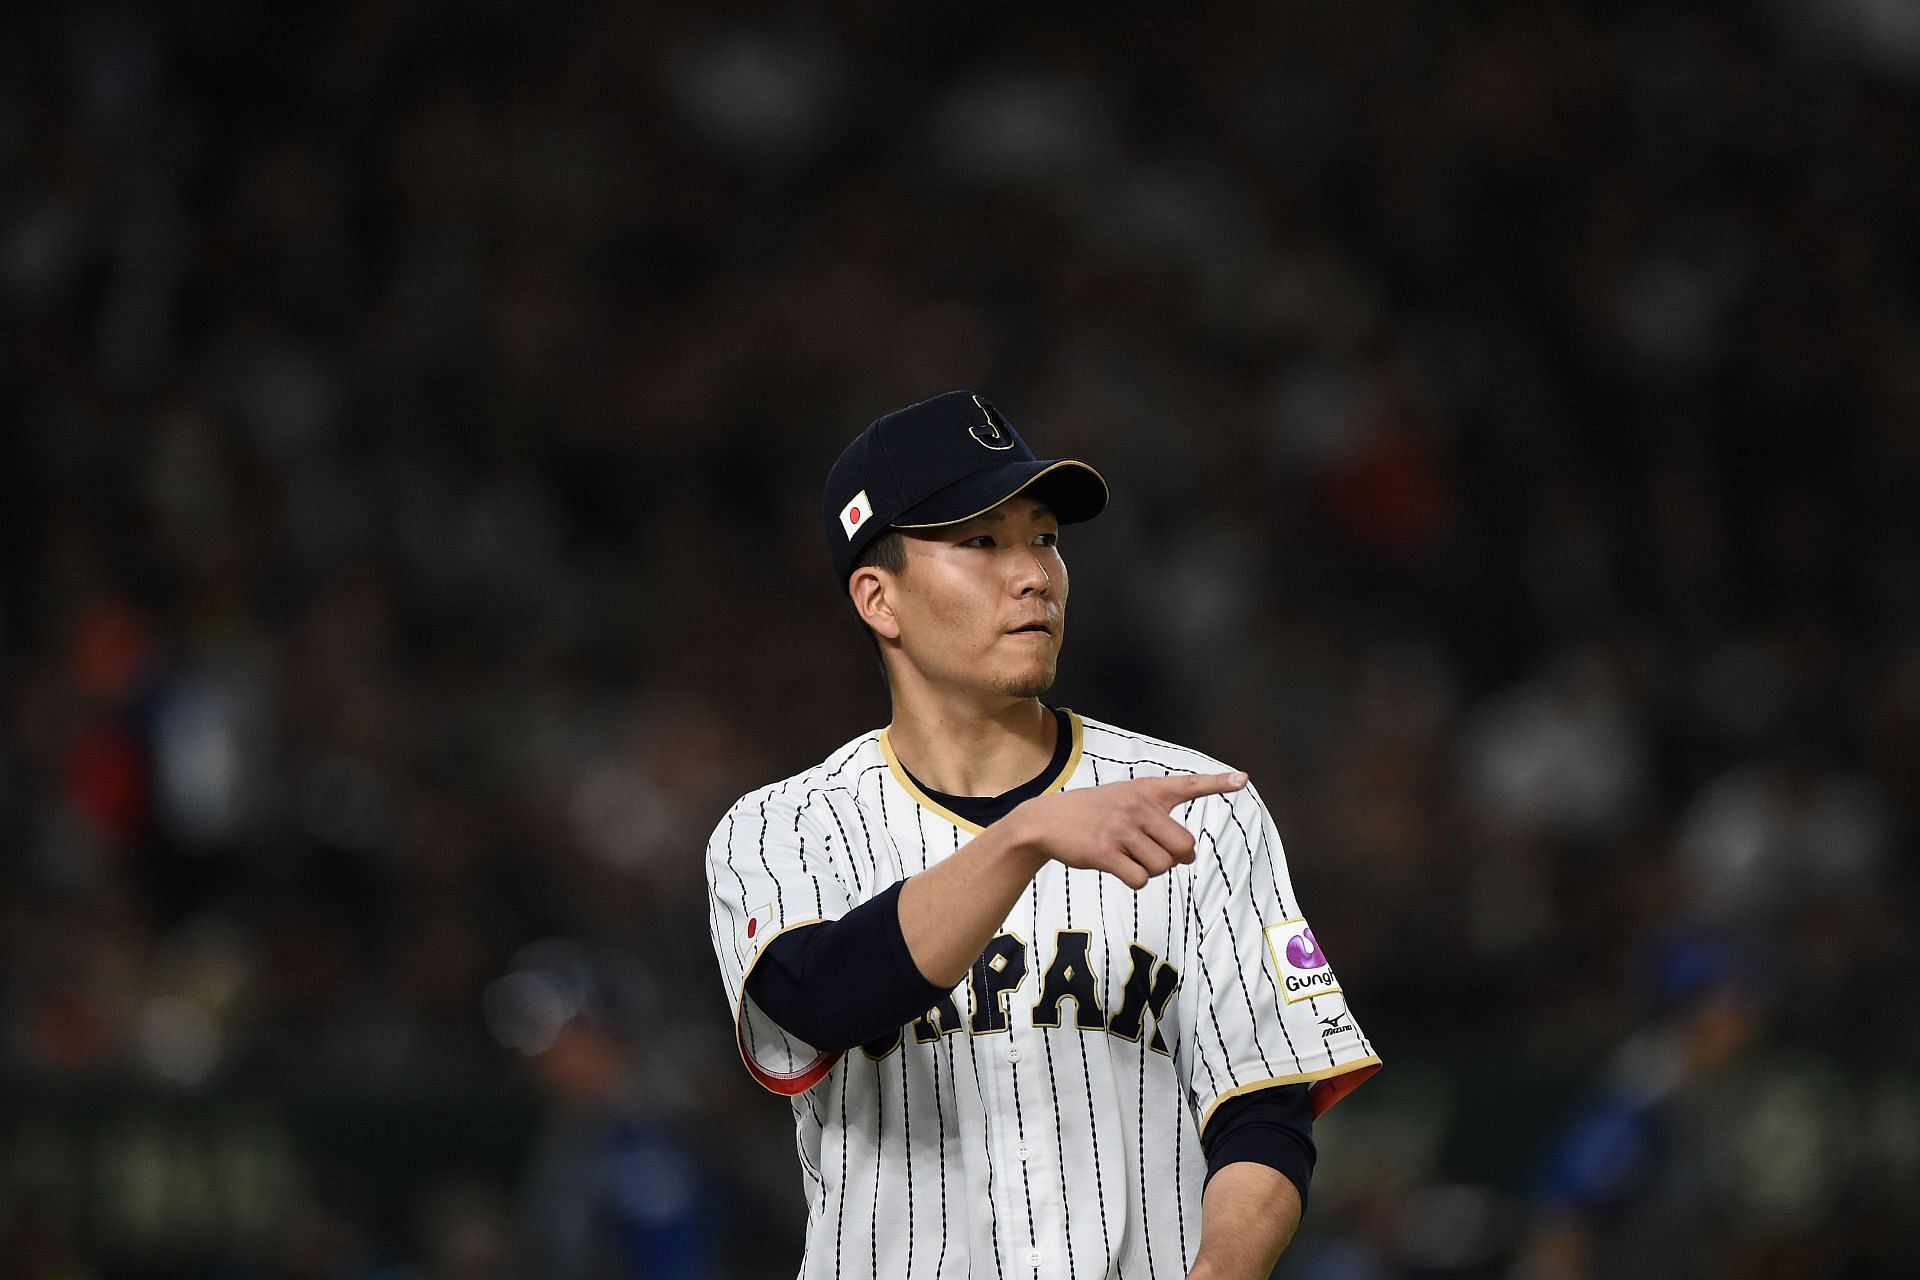 Pitcher Kohdai Senga reacts after the during the World Baseball Classic game between Israel and Japan at the Tokyo Dome